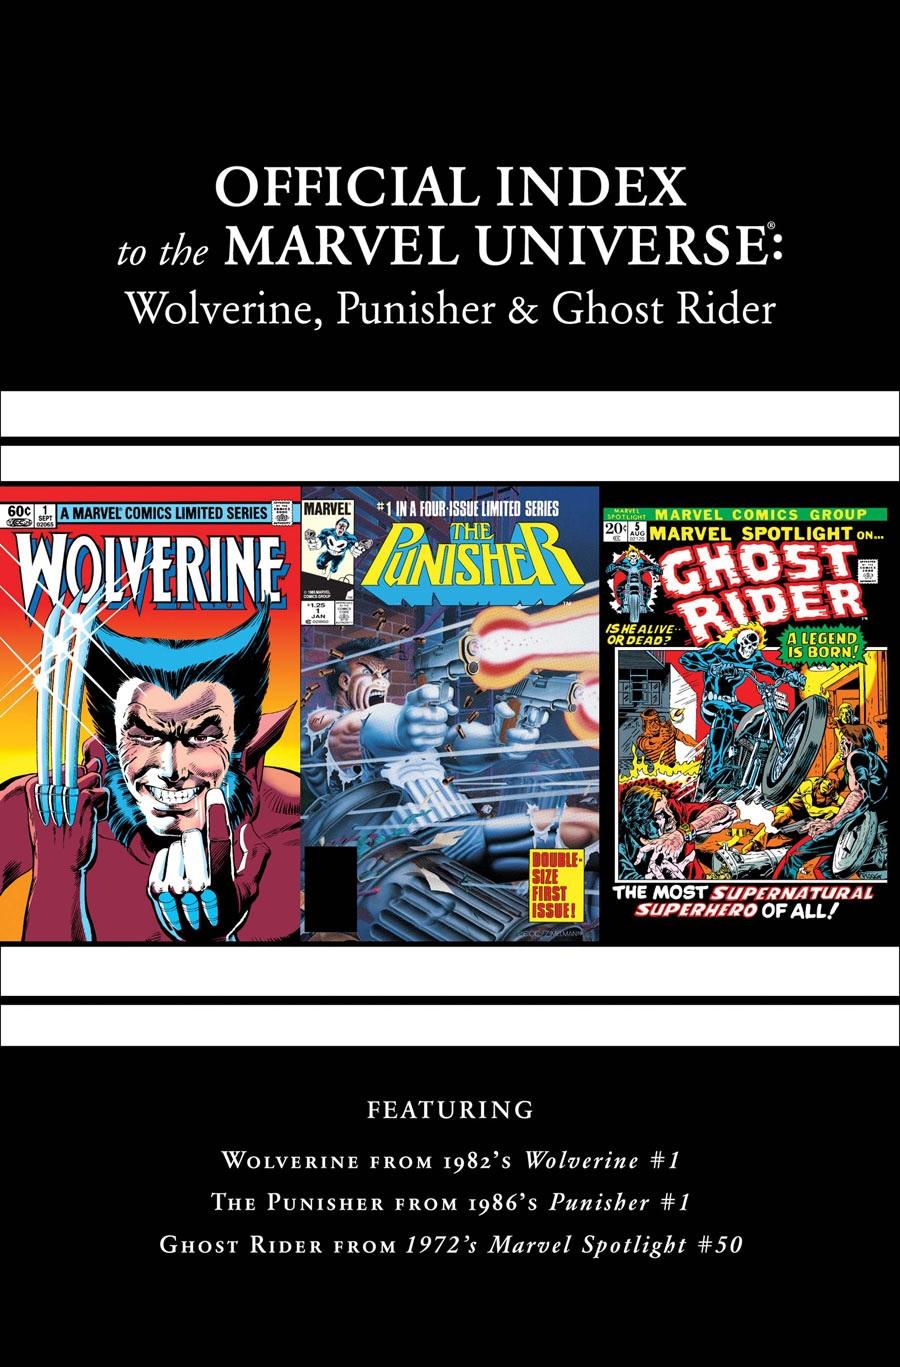 Wolverine, Punisher & Ghost Rider: Official Index to the Marvel Universe Vol. 1 #1